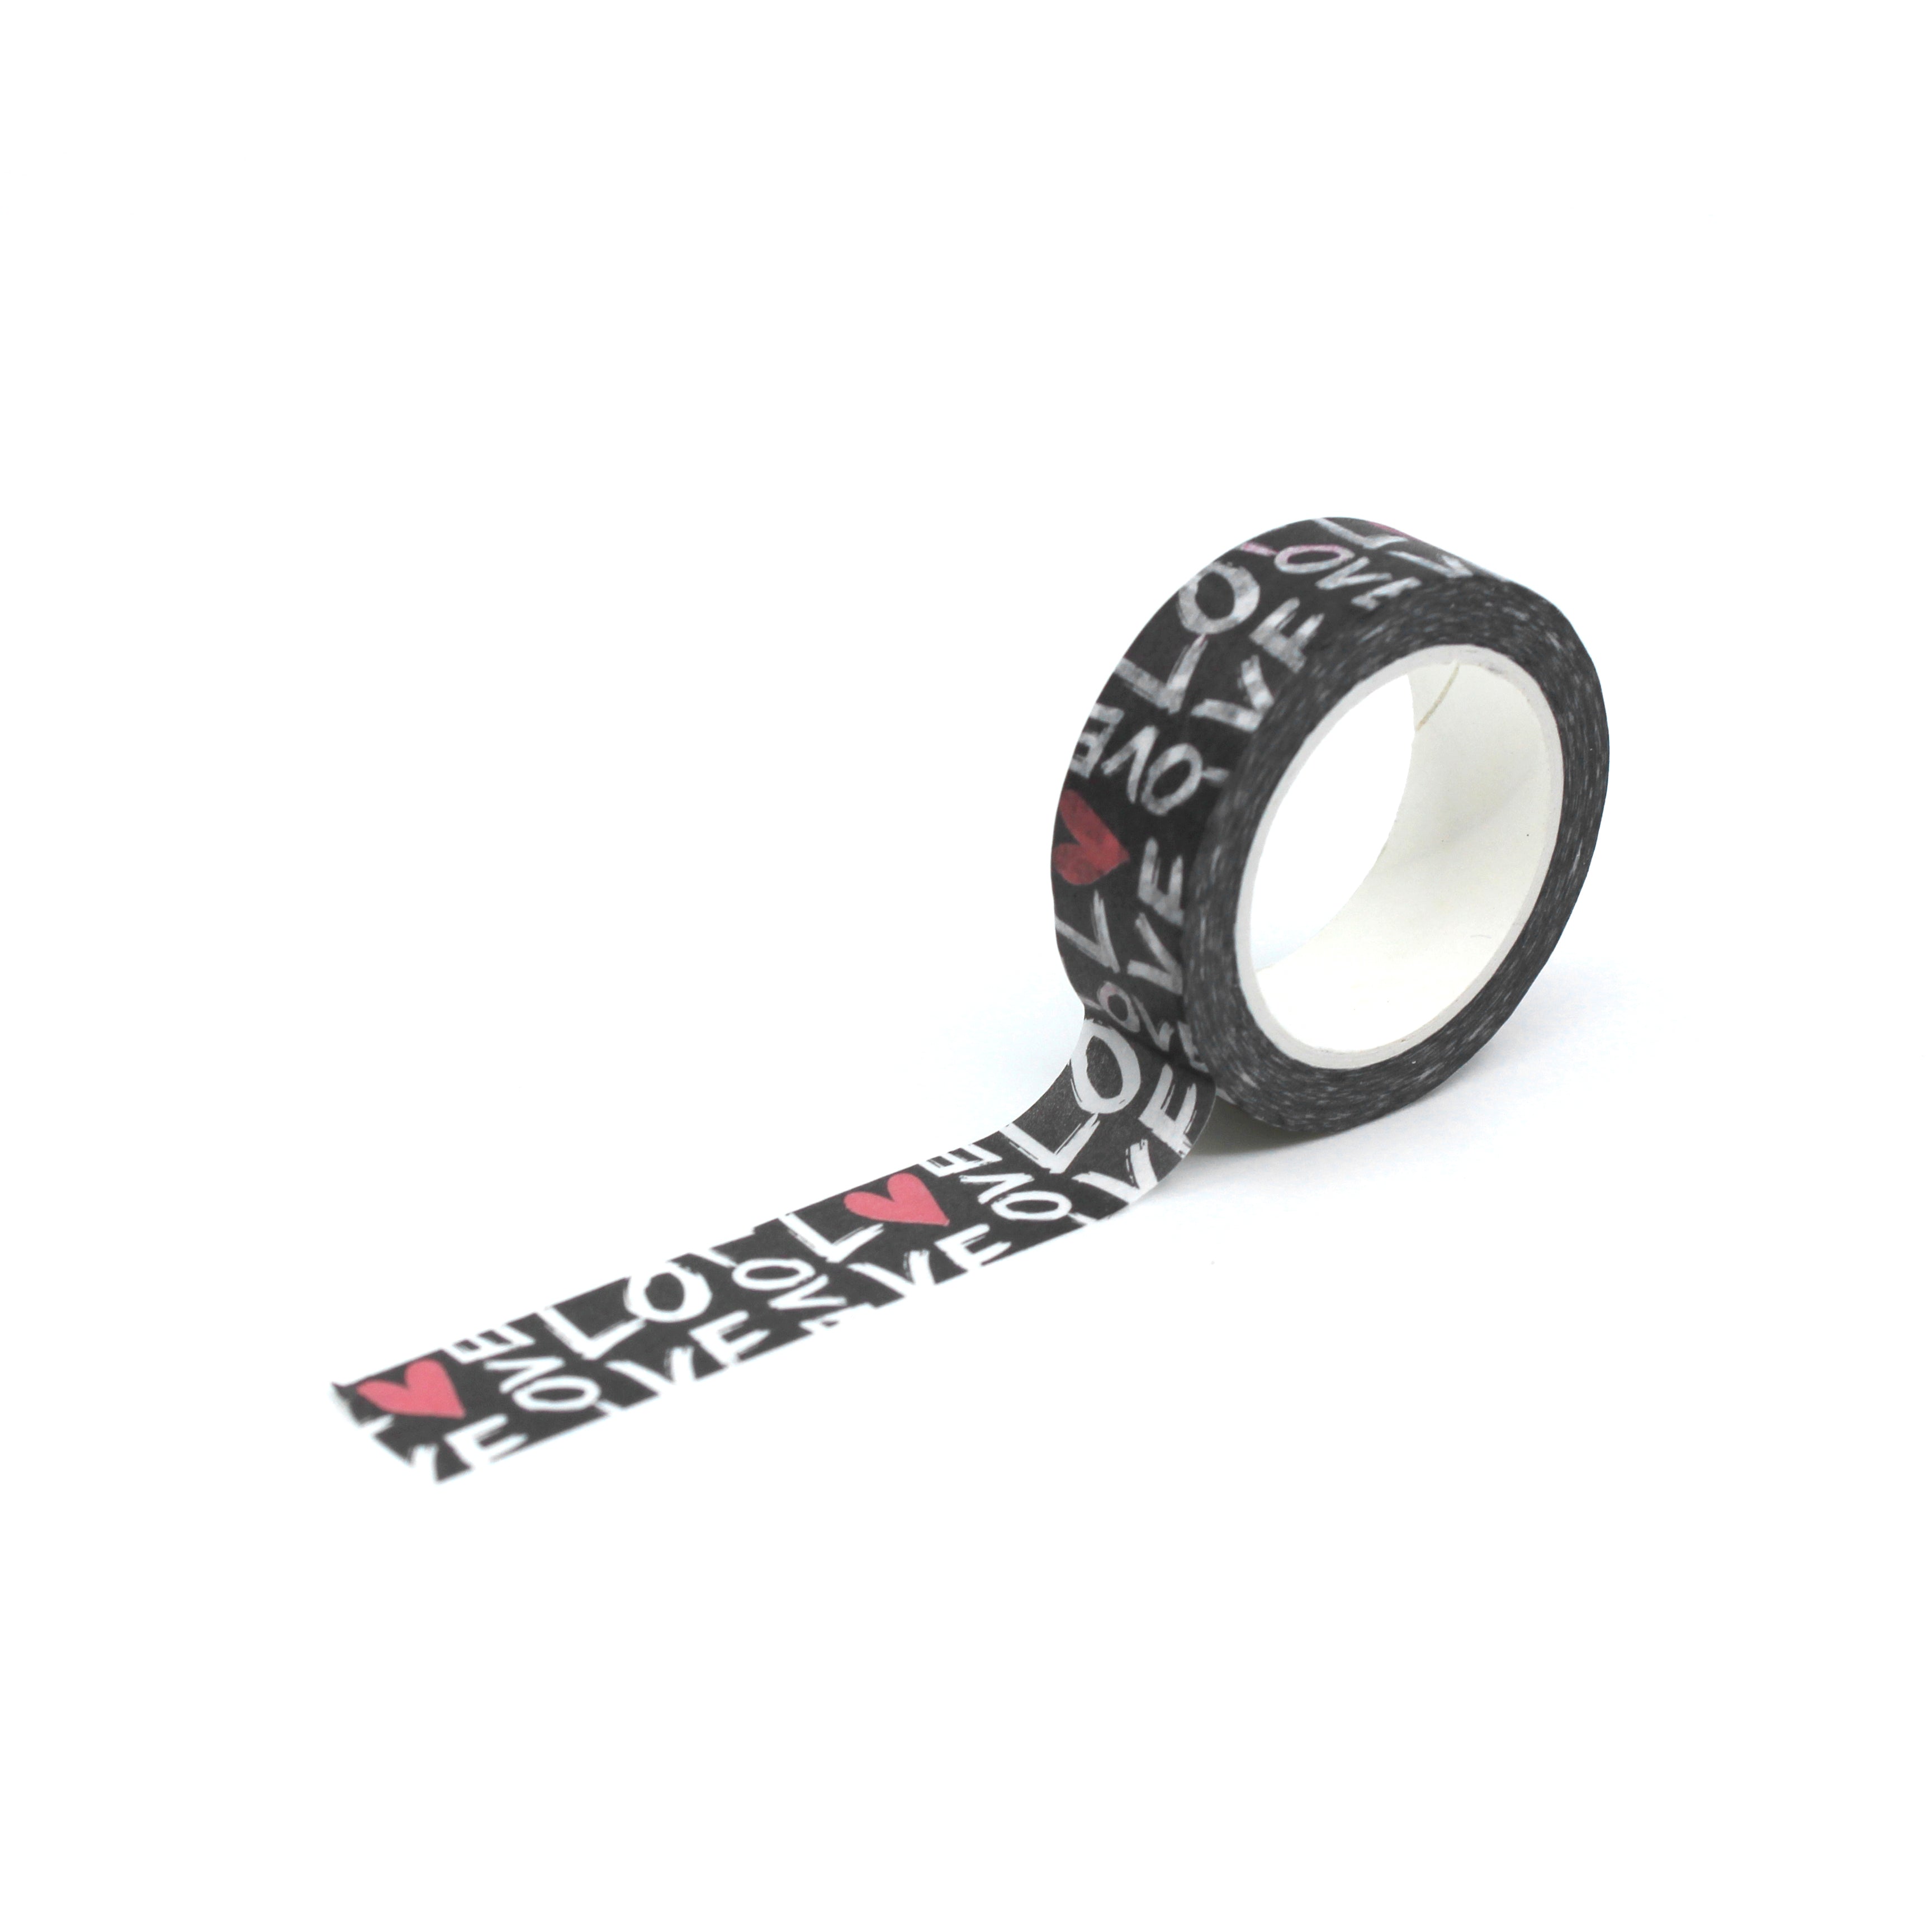 Elevate your crafts with this fun and graphic Love Typography Washi Tape. This tape uses a modern graffiti-style font to spell out expressions of love with heart motifs and is sold at BBB Supplies Craft Shop.